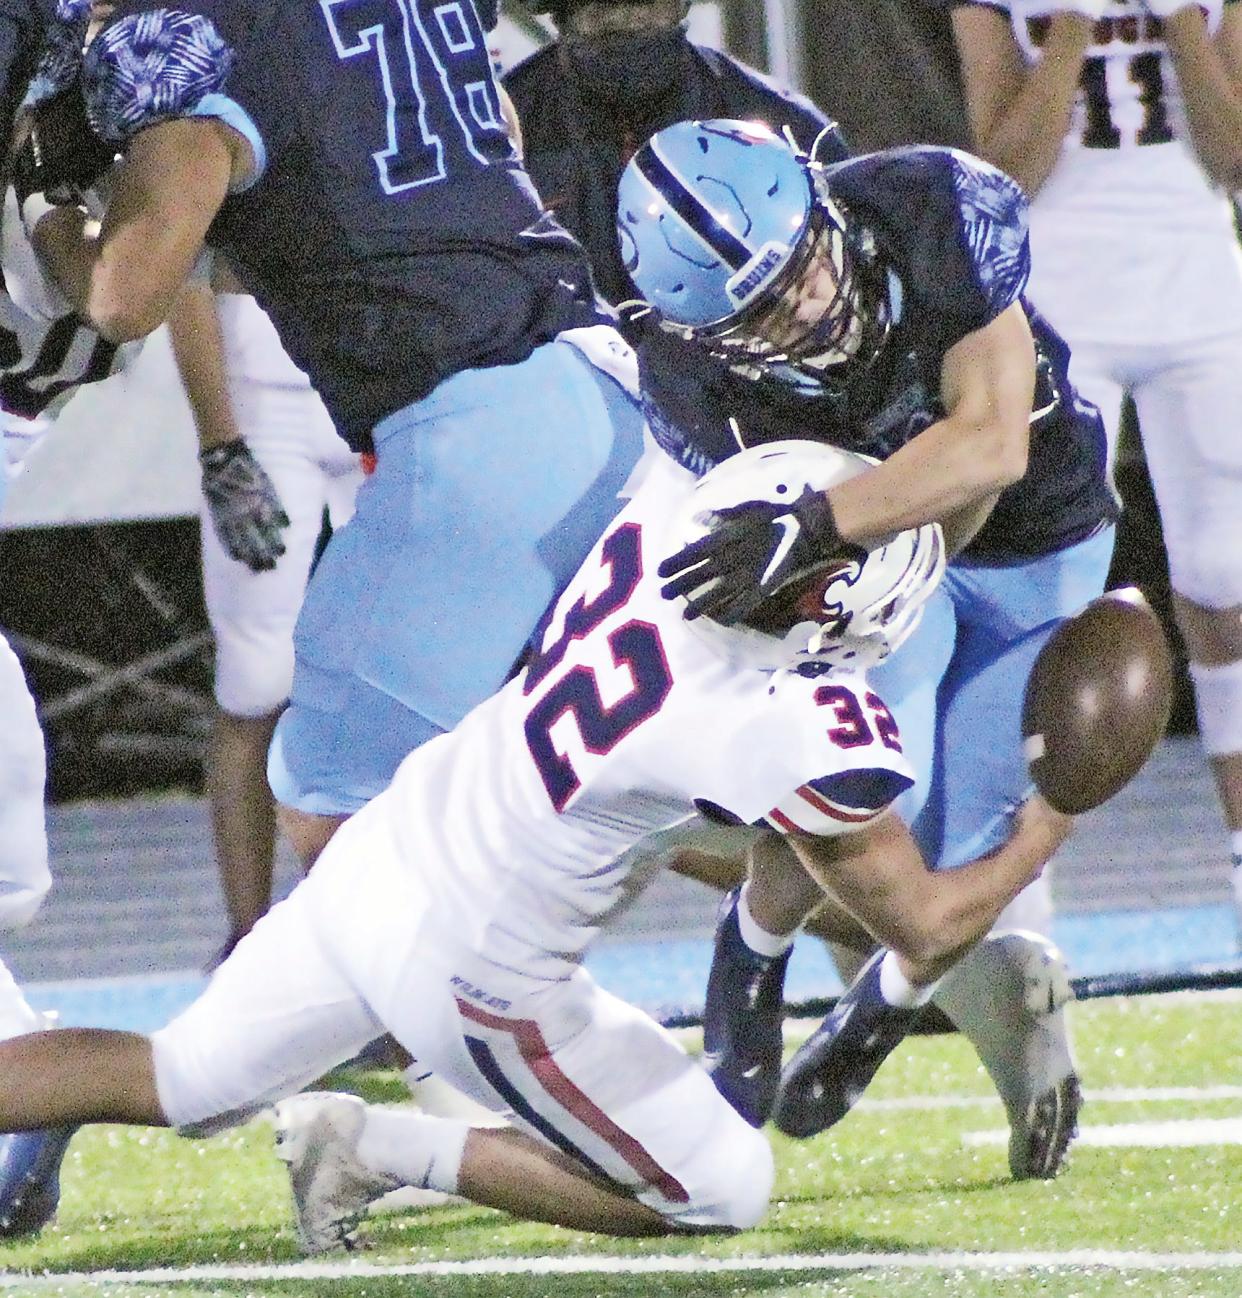 The ball comes loose after a collision between Bartlesville High's Dylan McCoy, right and Ponca City's Collier Lively during a smashmouth football battle in Bartlesville, during the 2020 season. The 2022 season will mark the 39th meeting since 1982 between Bartlesville and Ponca City.